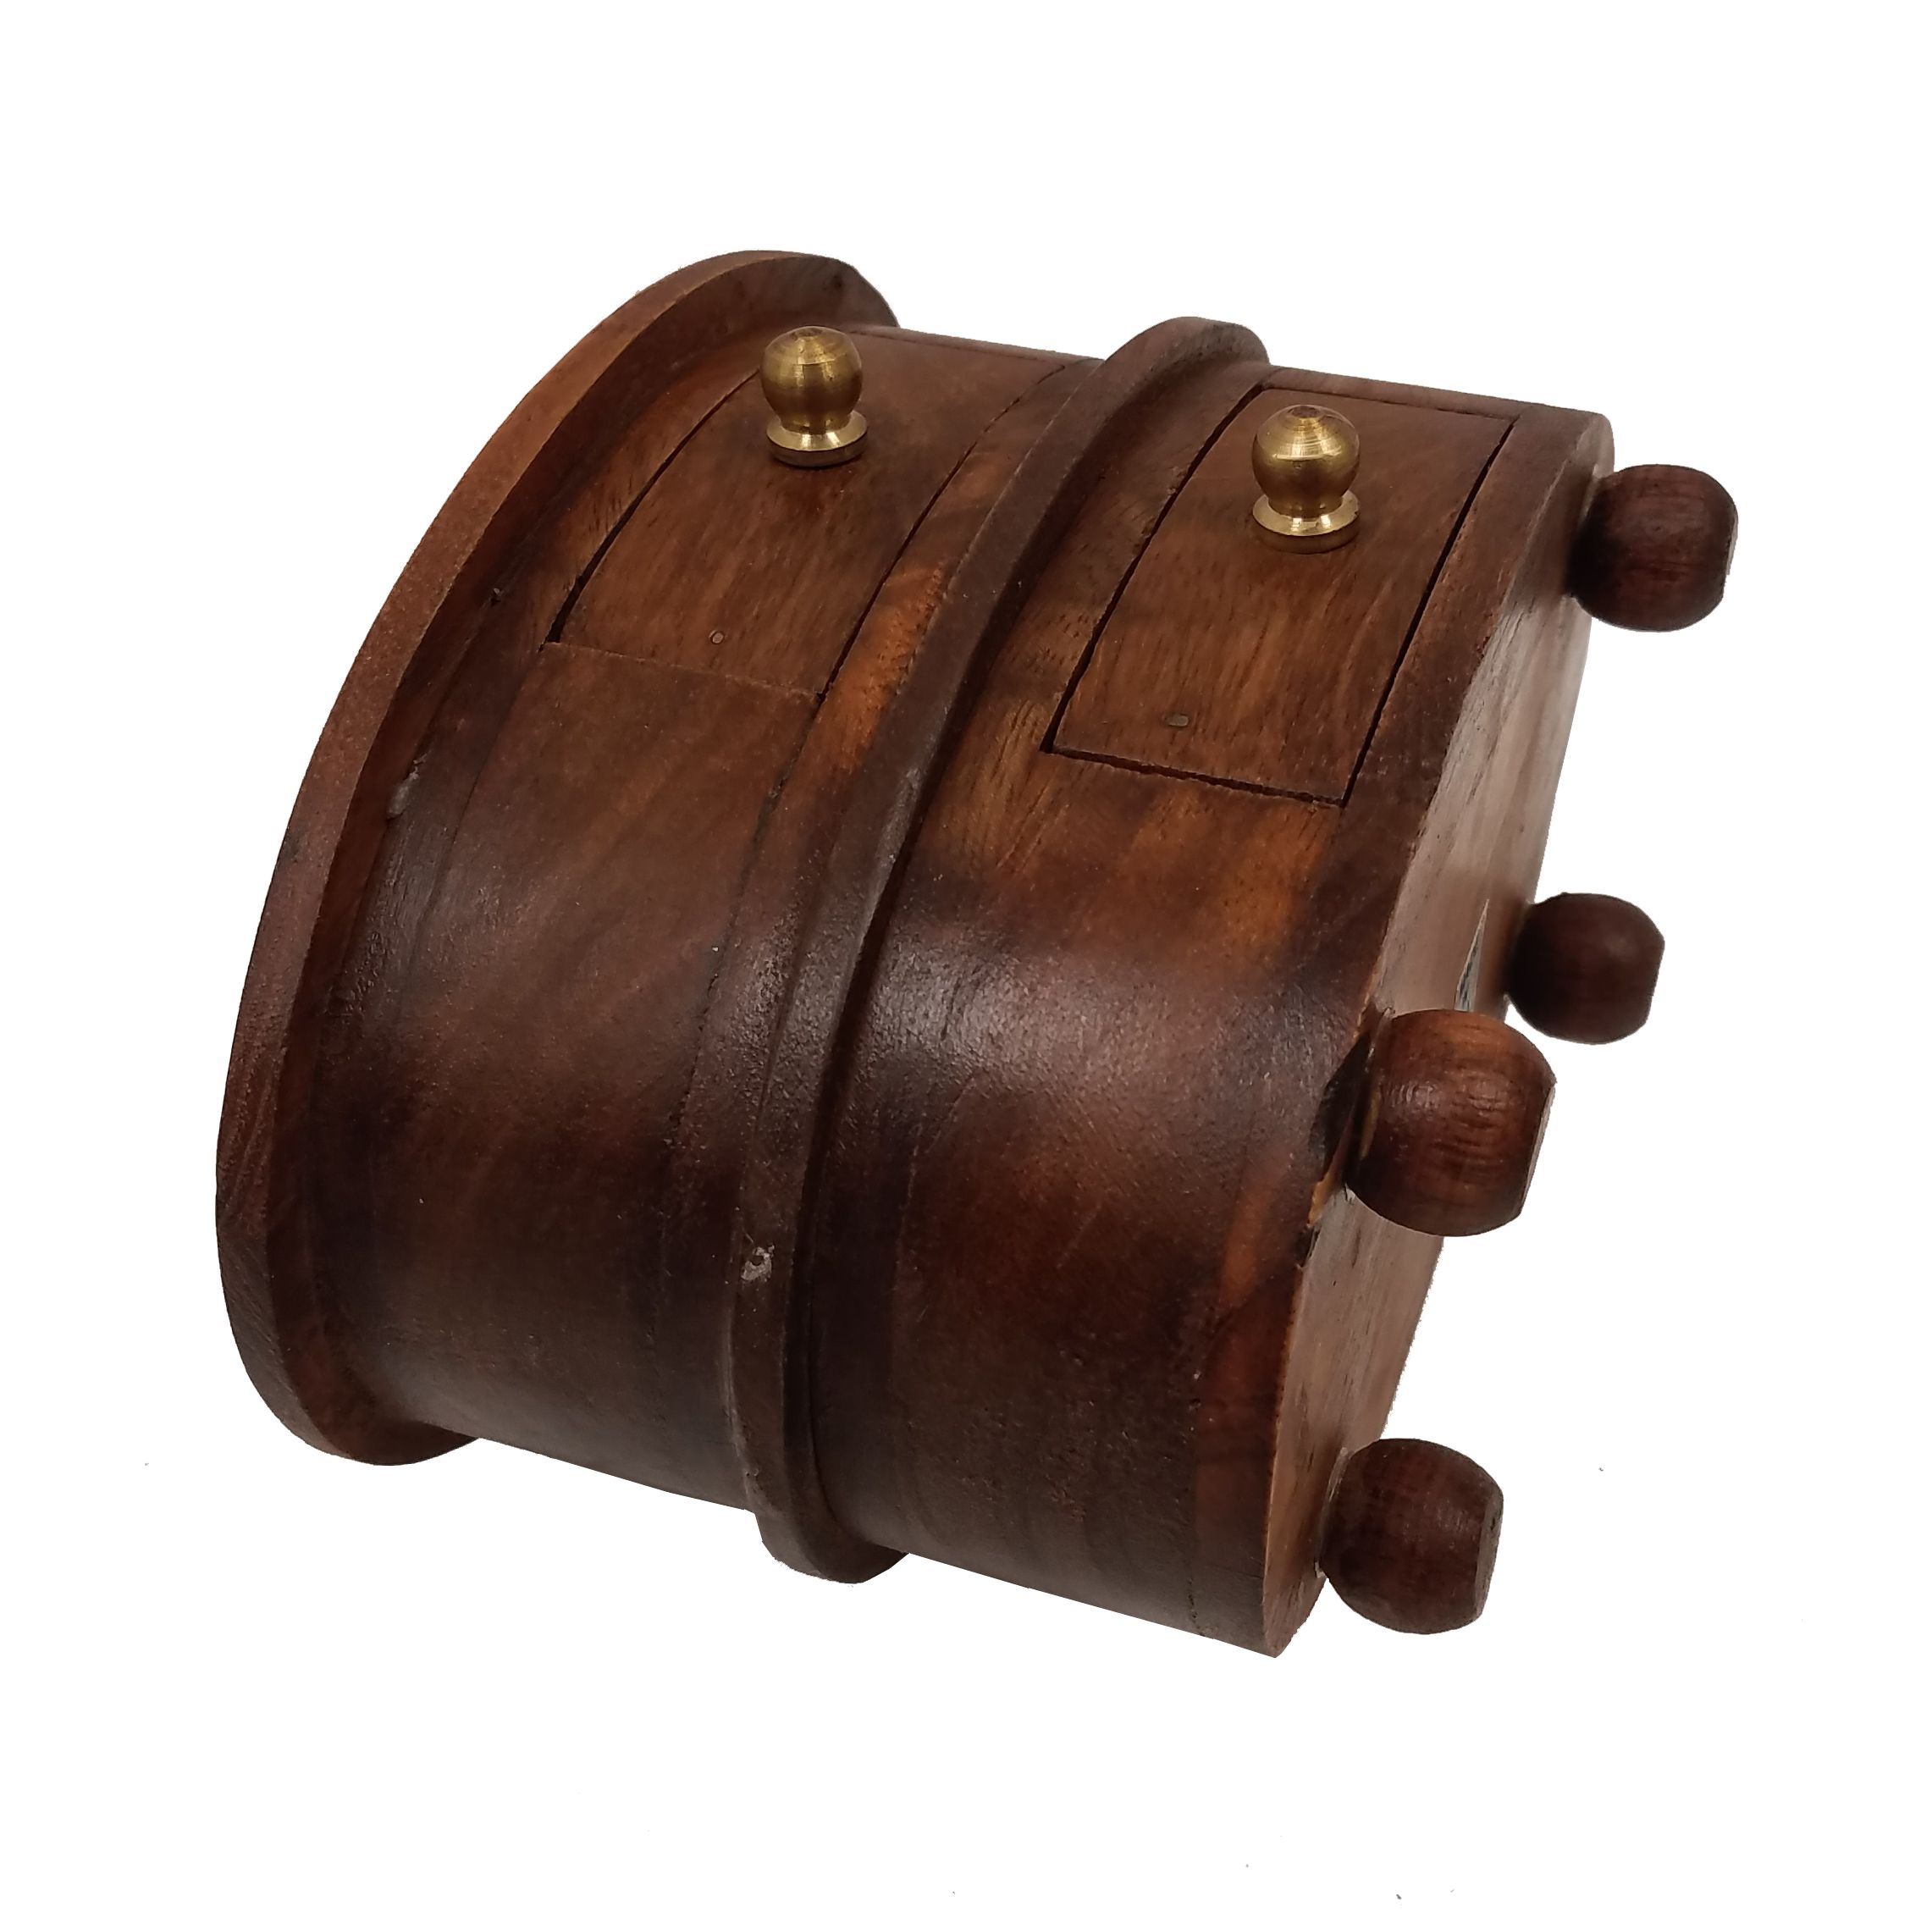 Solid Teak Wood Oval Jewelry or Trinket Box With Two Drawers